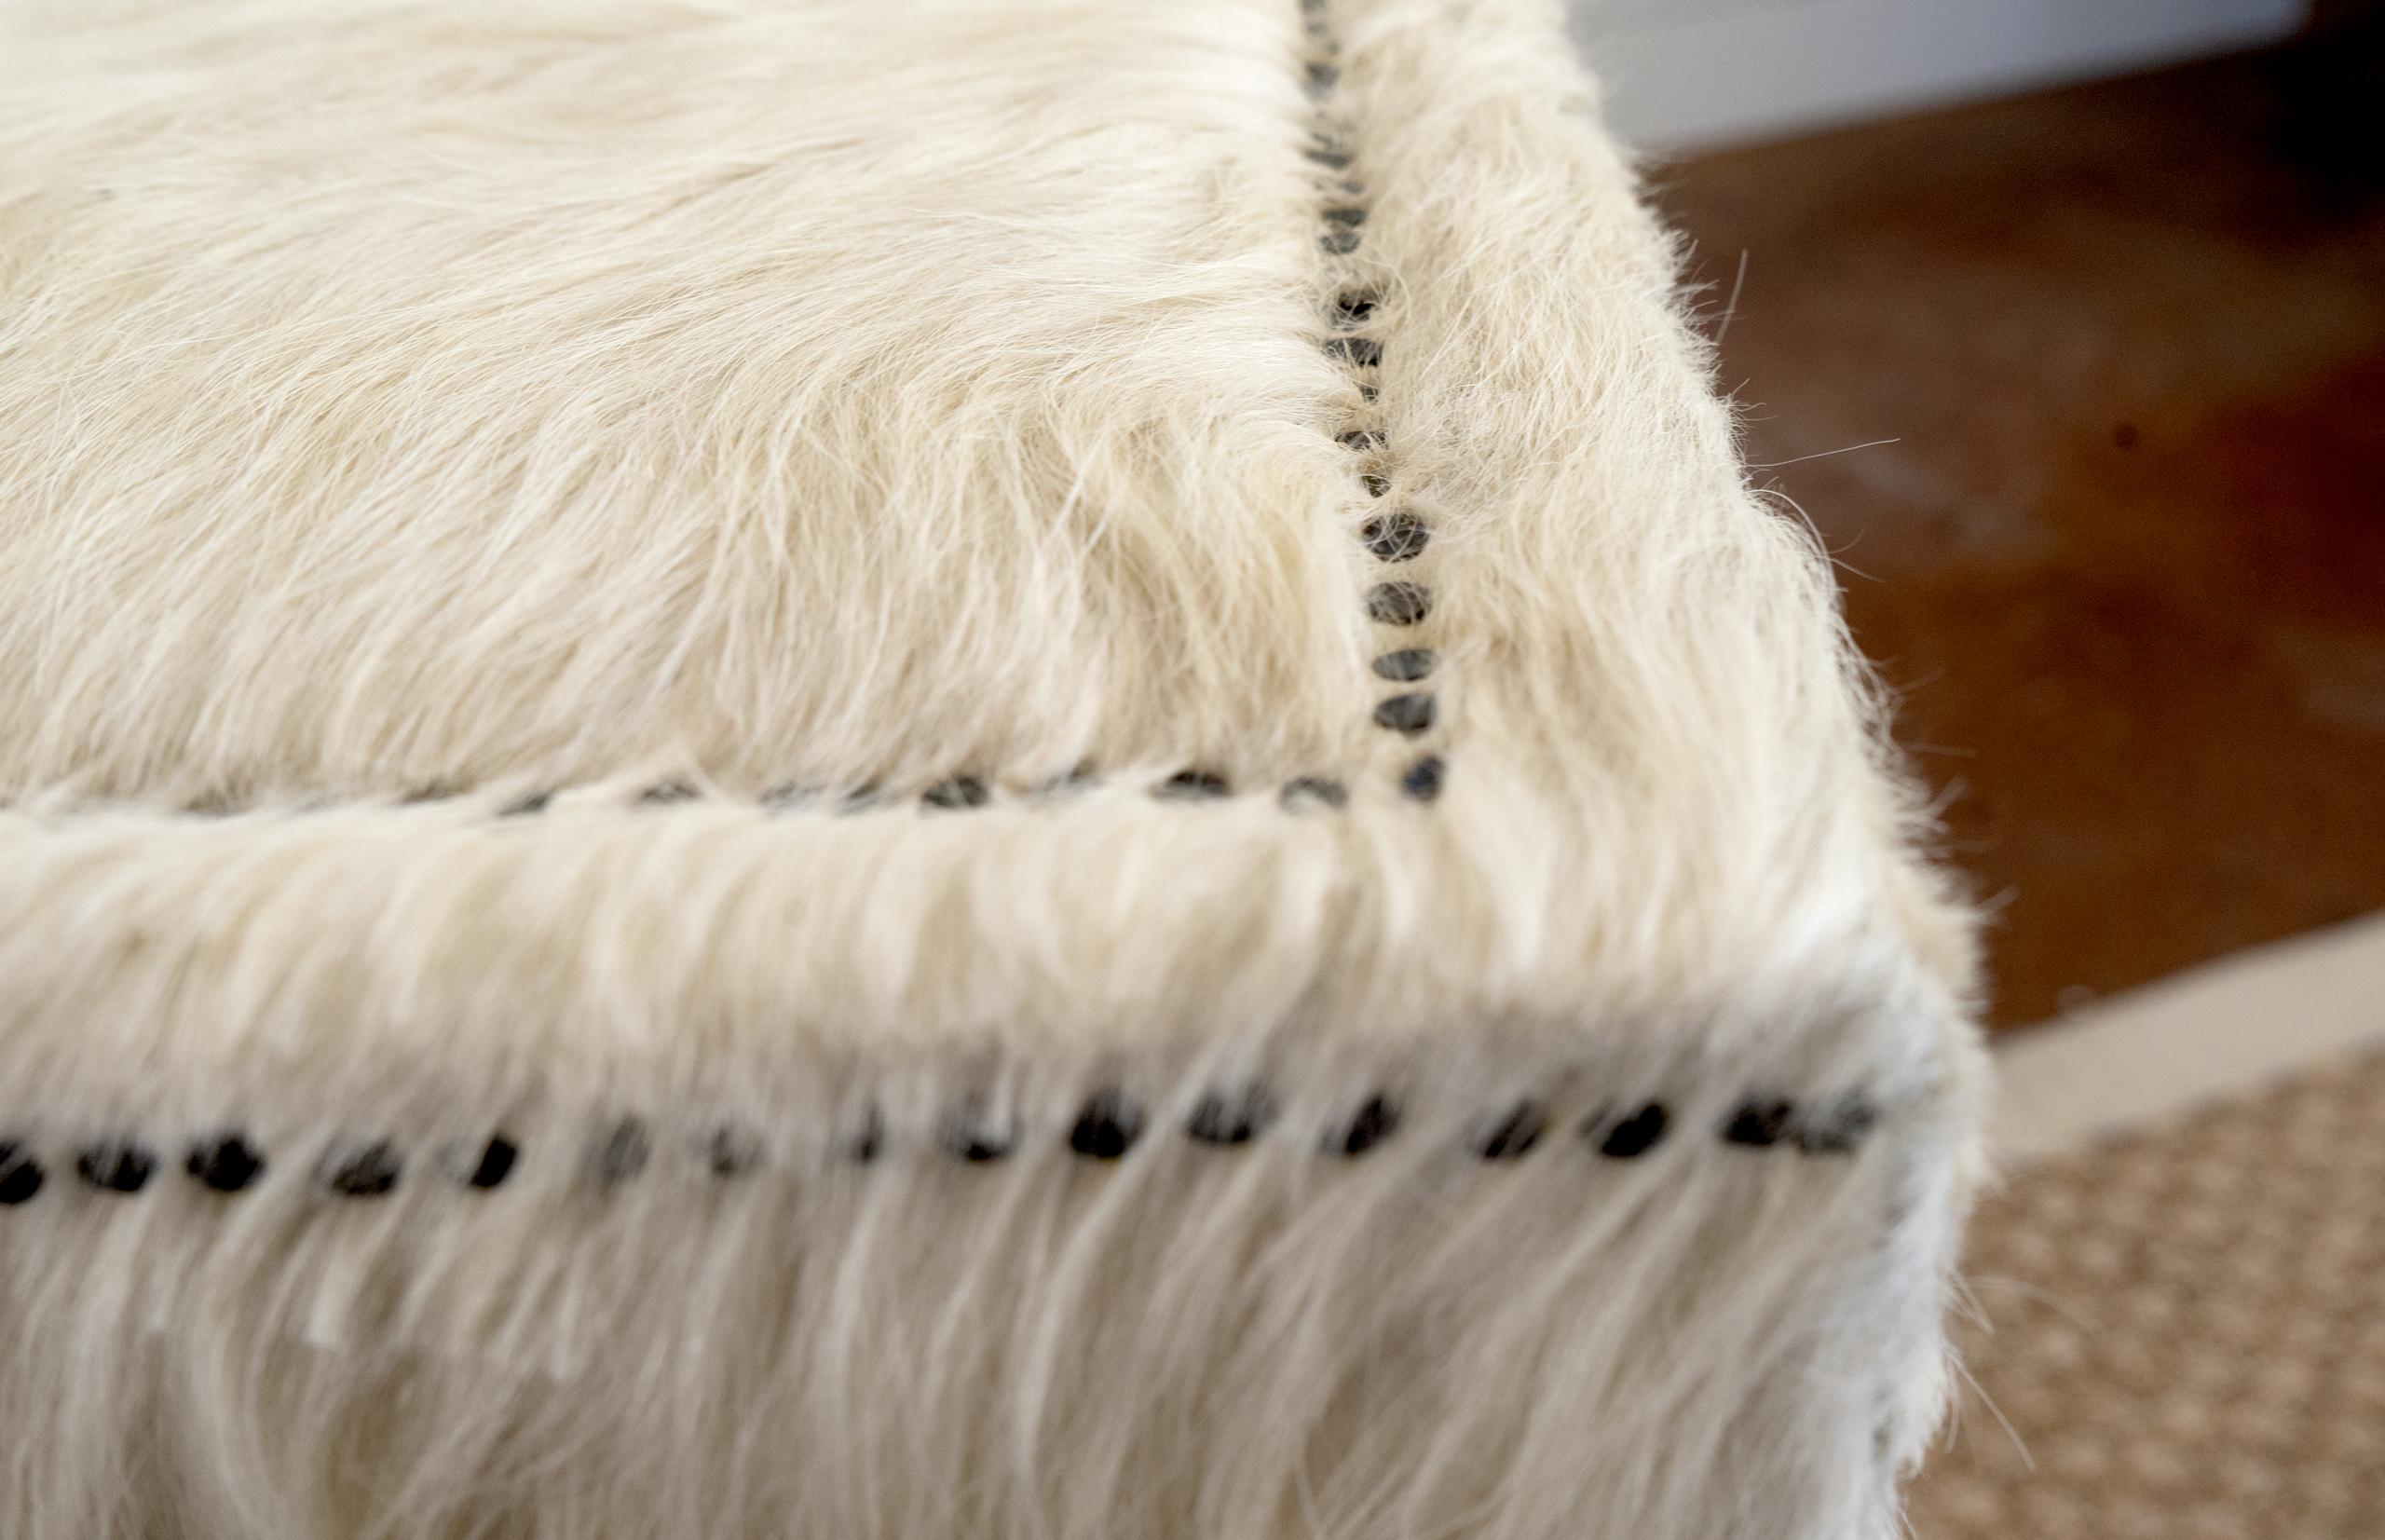 Vintage coffee table with vintage winter length cowhide covering the entire table. French nail heads accent the beautiful style of this piece.